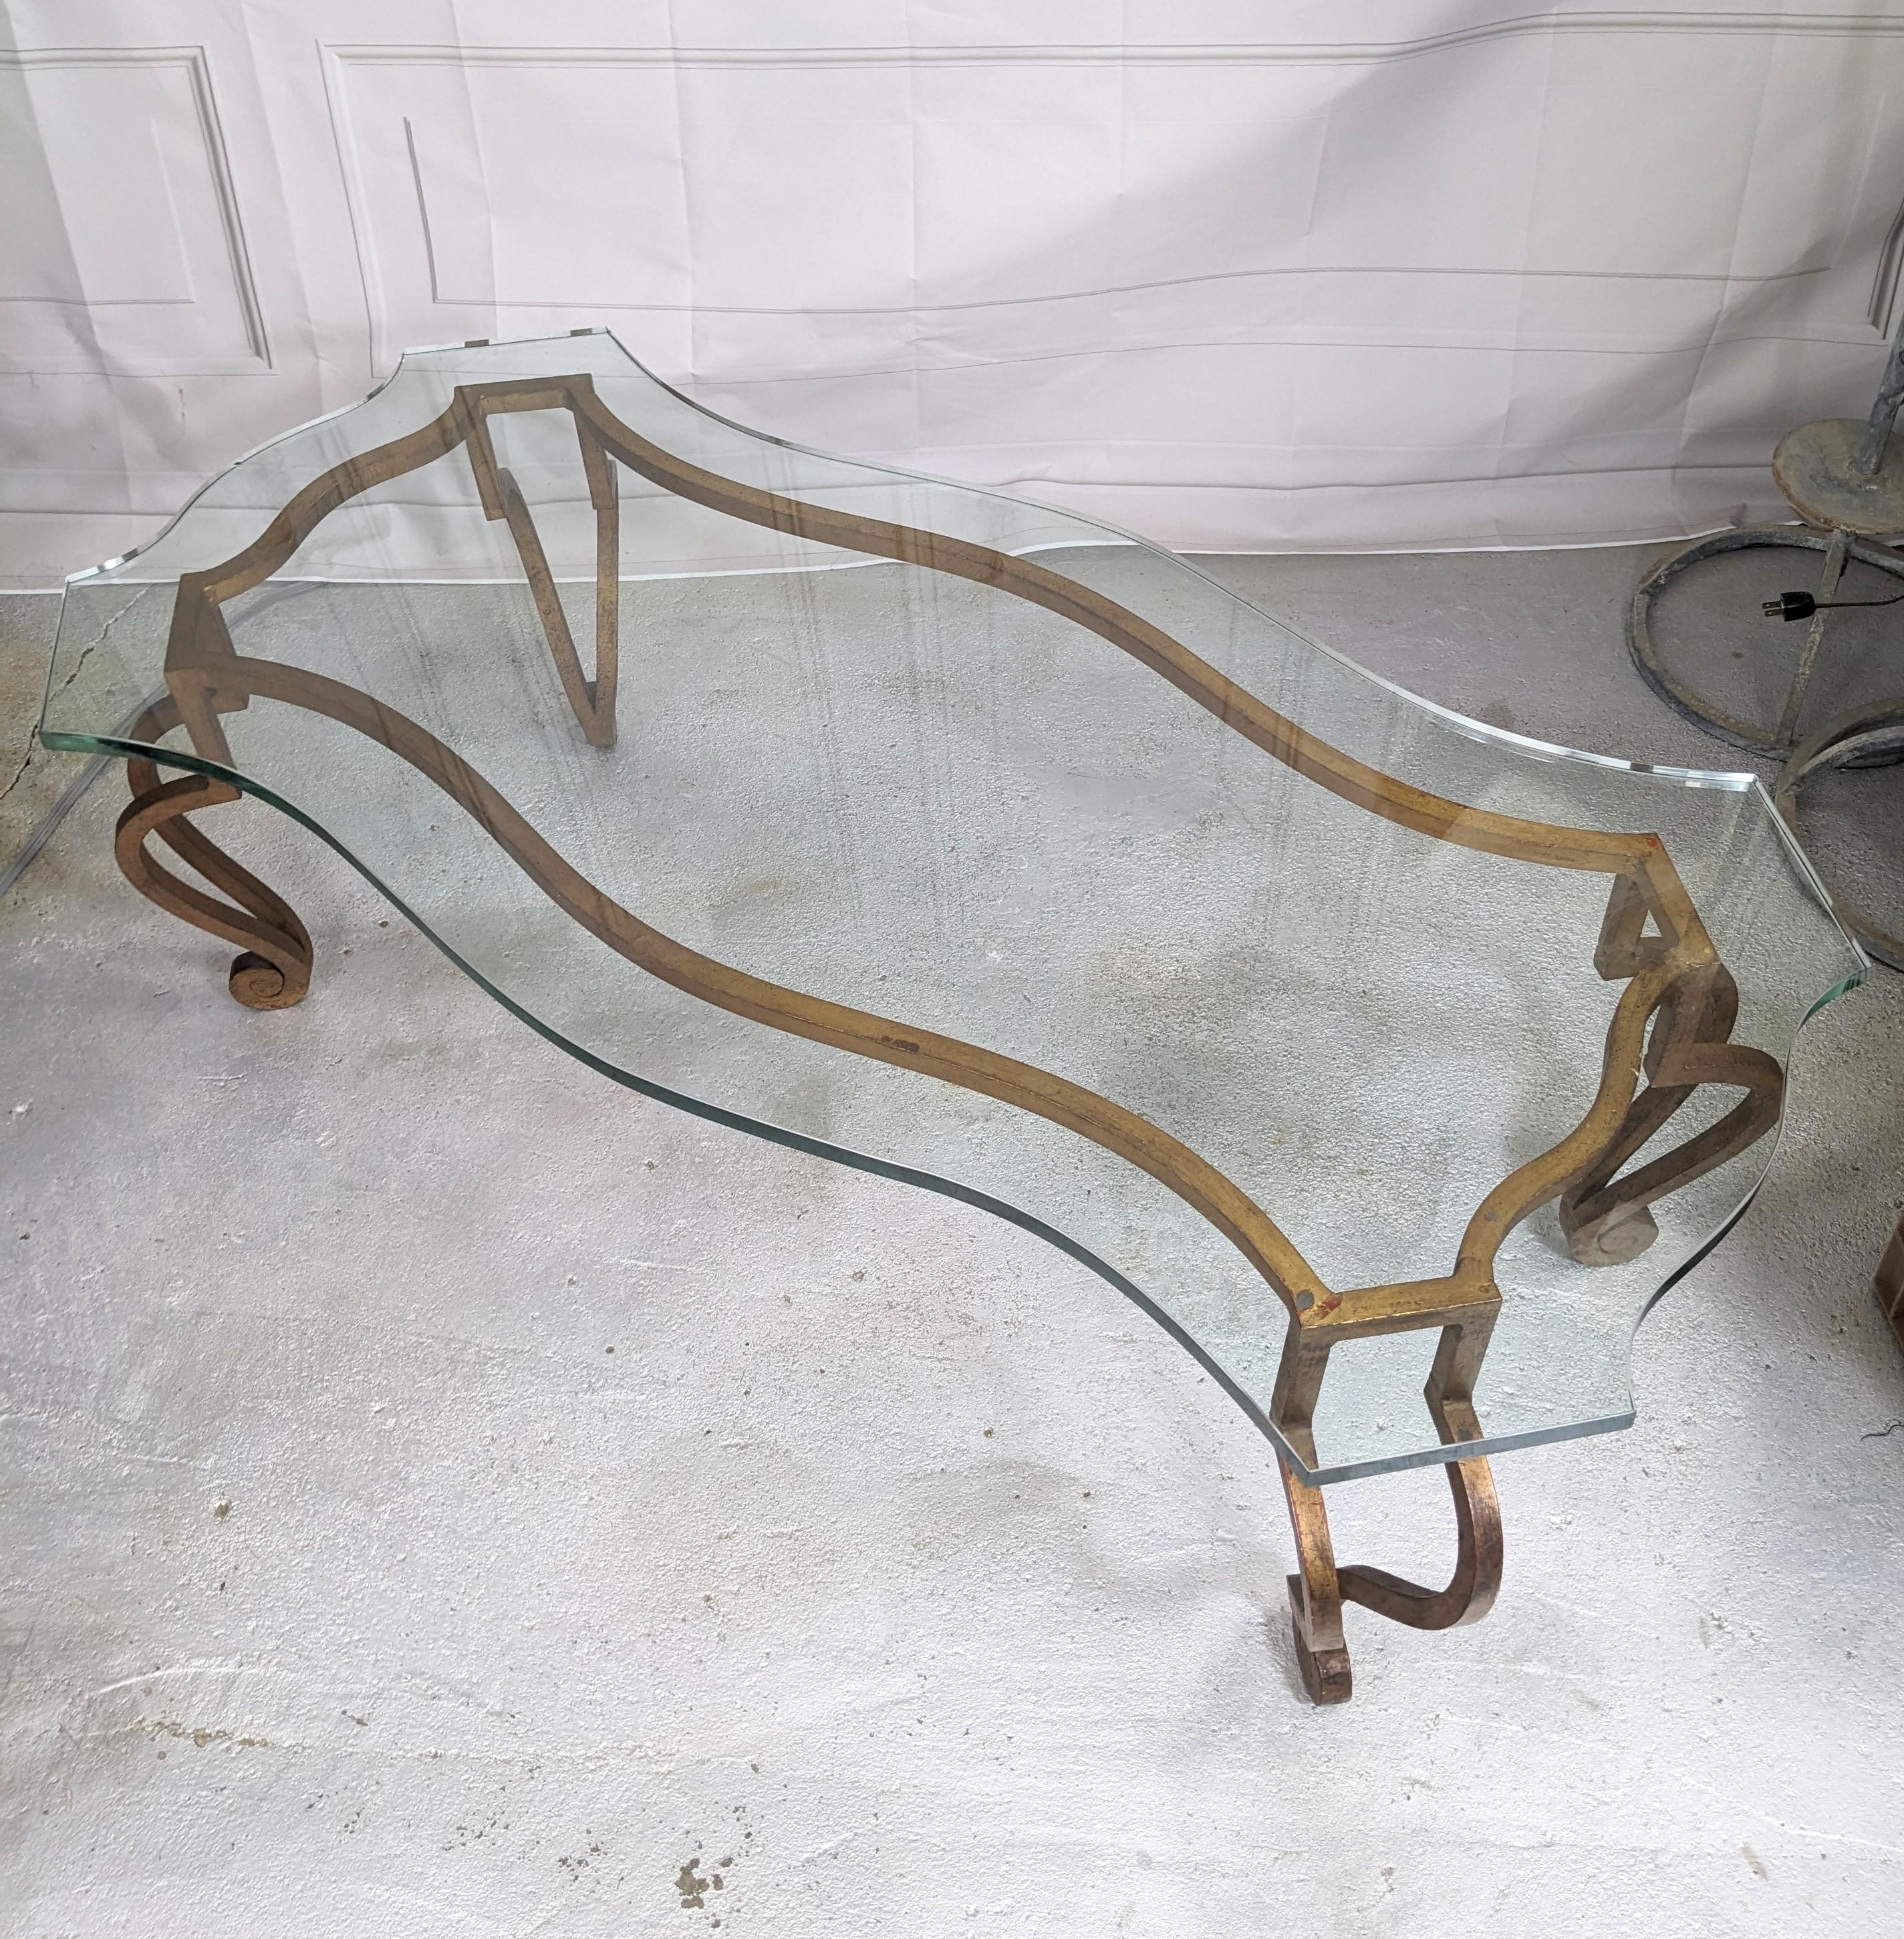 Elegant French Mid Century Gilt Iron Coffee Table in the Jansen style of gilt forged iron with fancy cut thick glass scalloped top. Typical dramatic lines in the Mid Century French style which is timelessly elegant. Nicely patinaed hand gold leaf